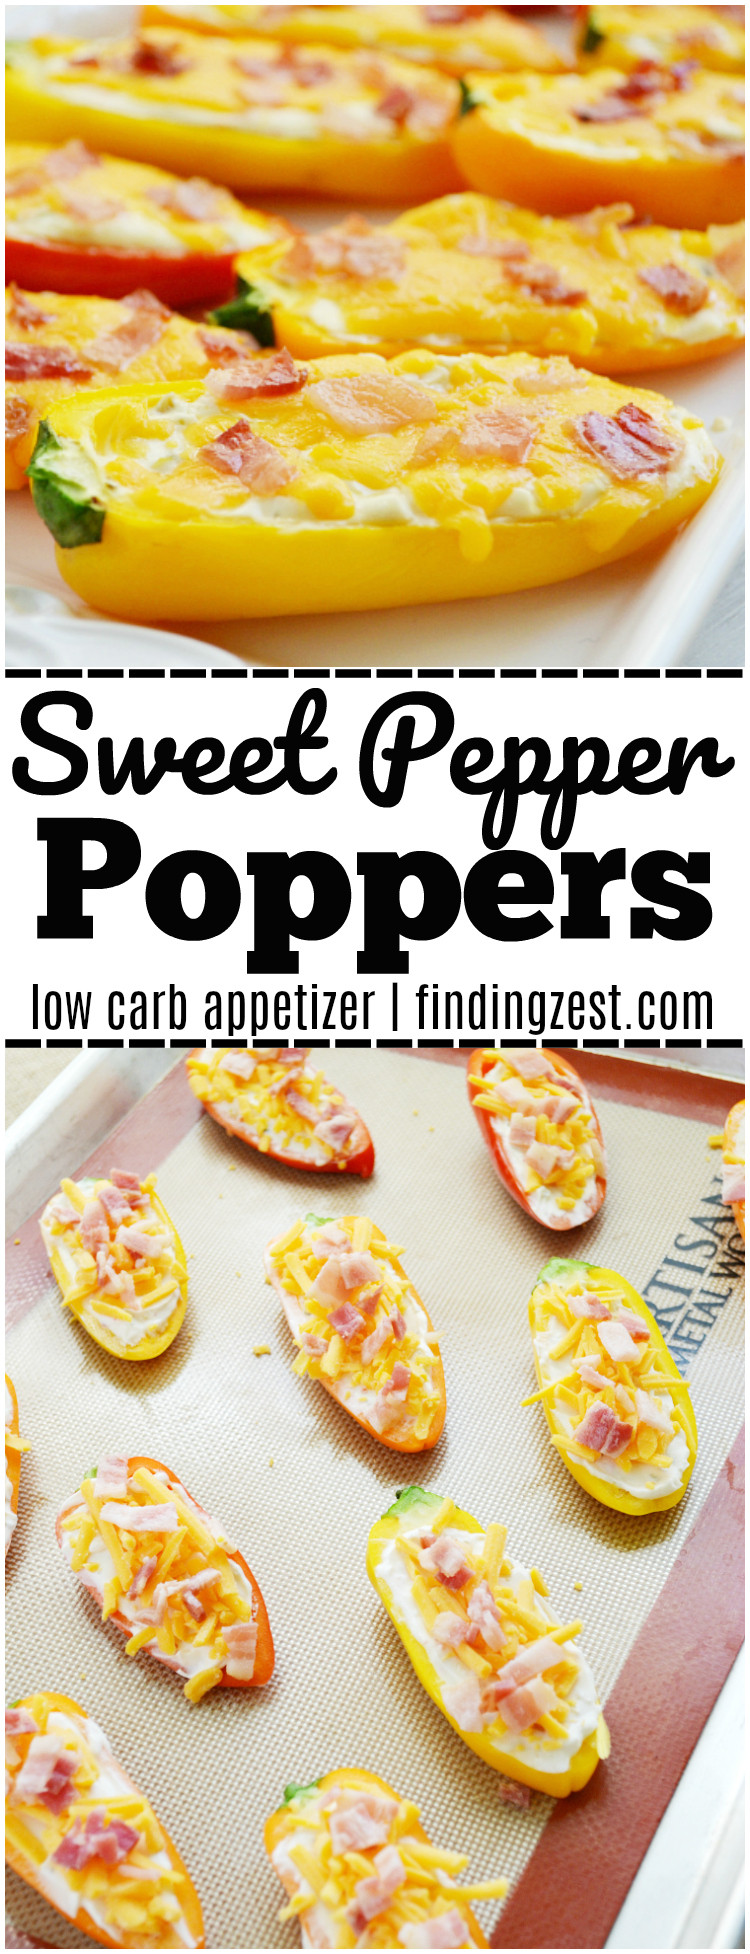 Low Carb Appetizer Recipes
 Sweet Pepper Poppers Low Carb Appetizer Finding Zest